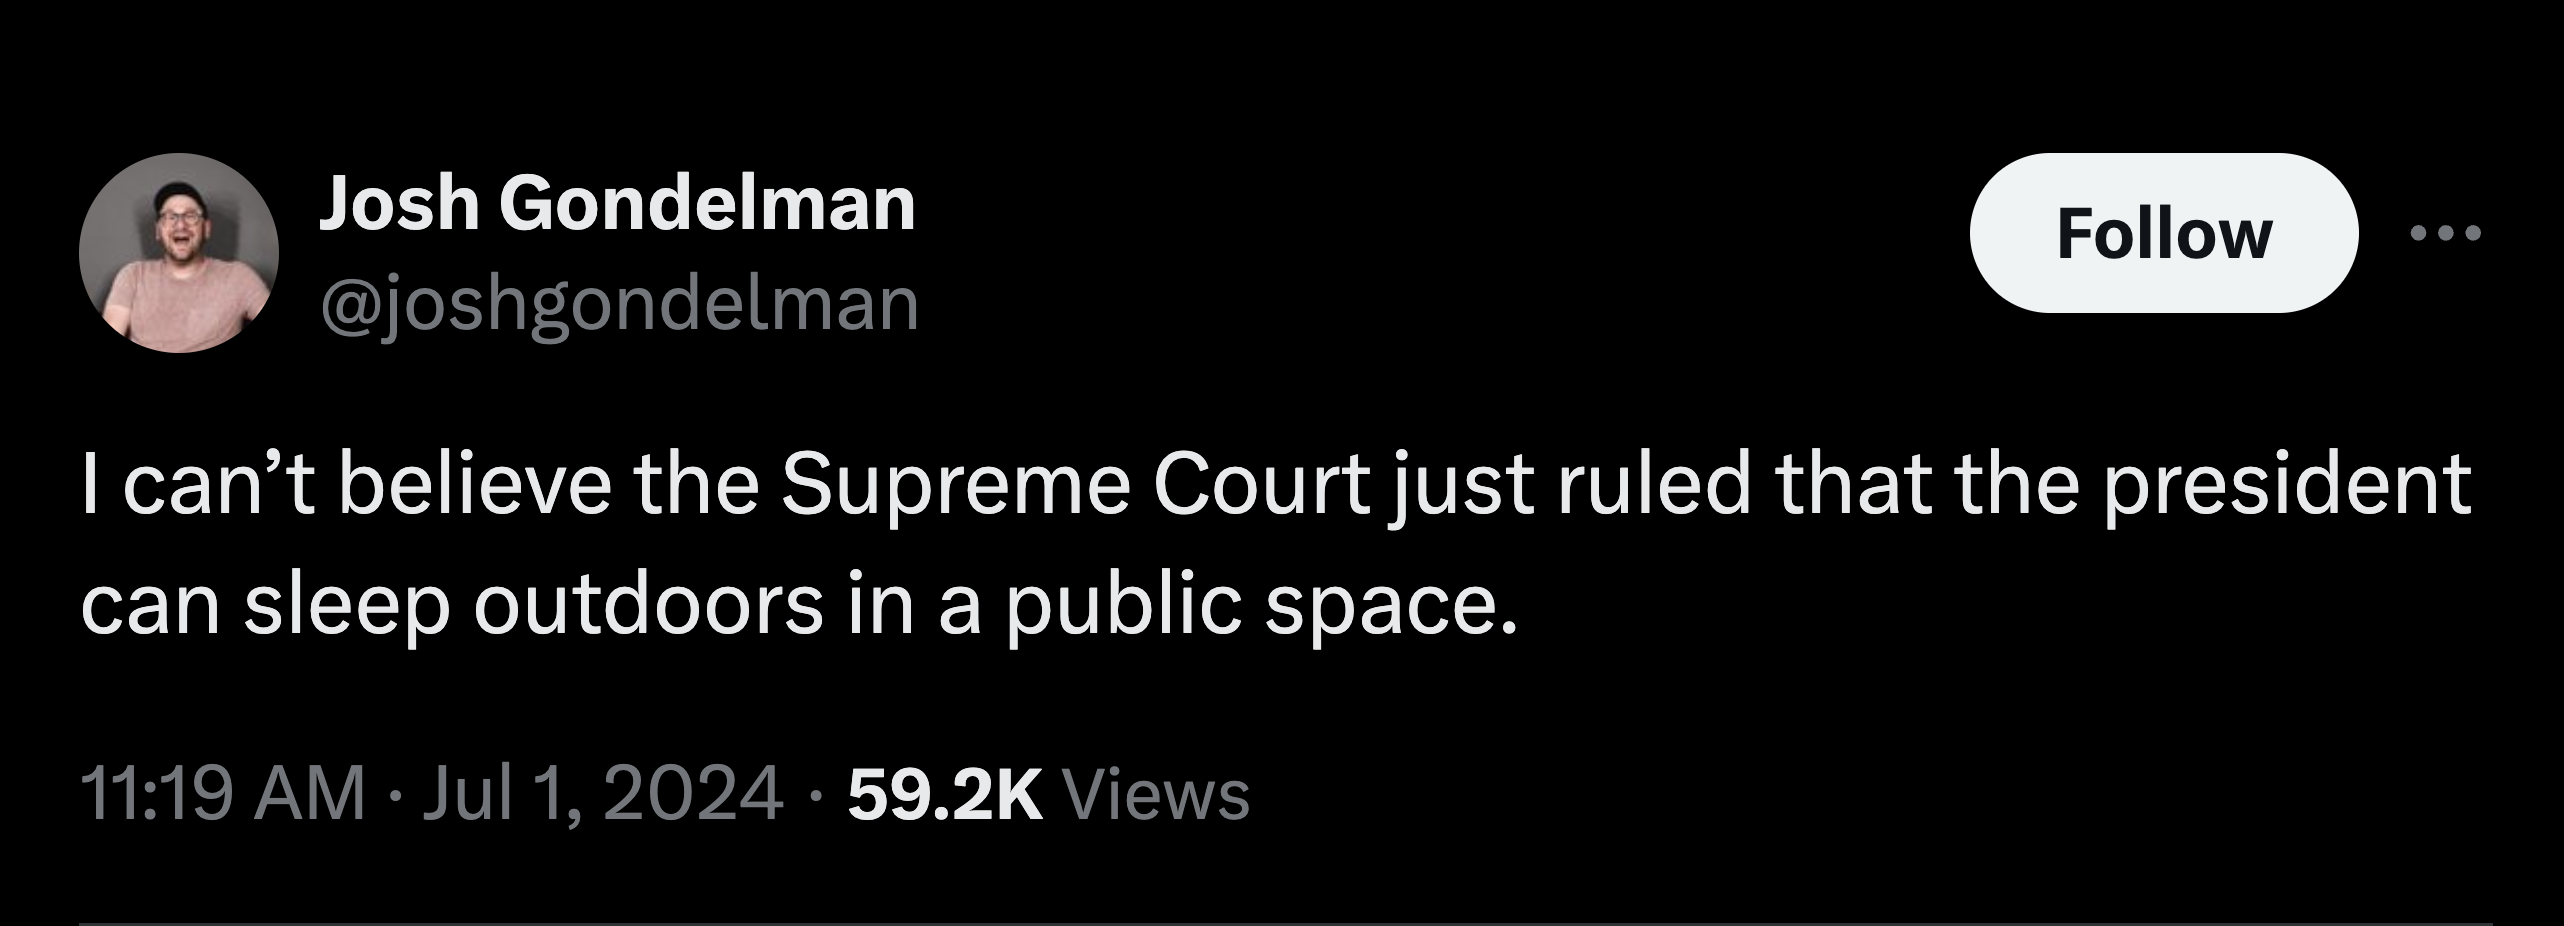 parallel - Josh Gondelman I can't believe the Supreme Court just ruled that the president can sleep outdoors in a public space. Views